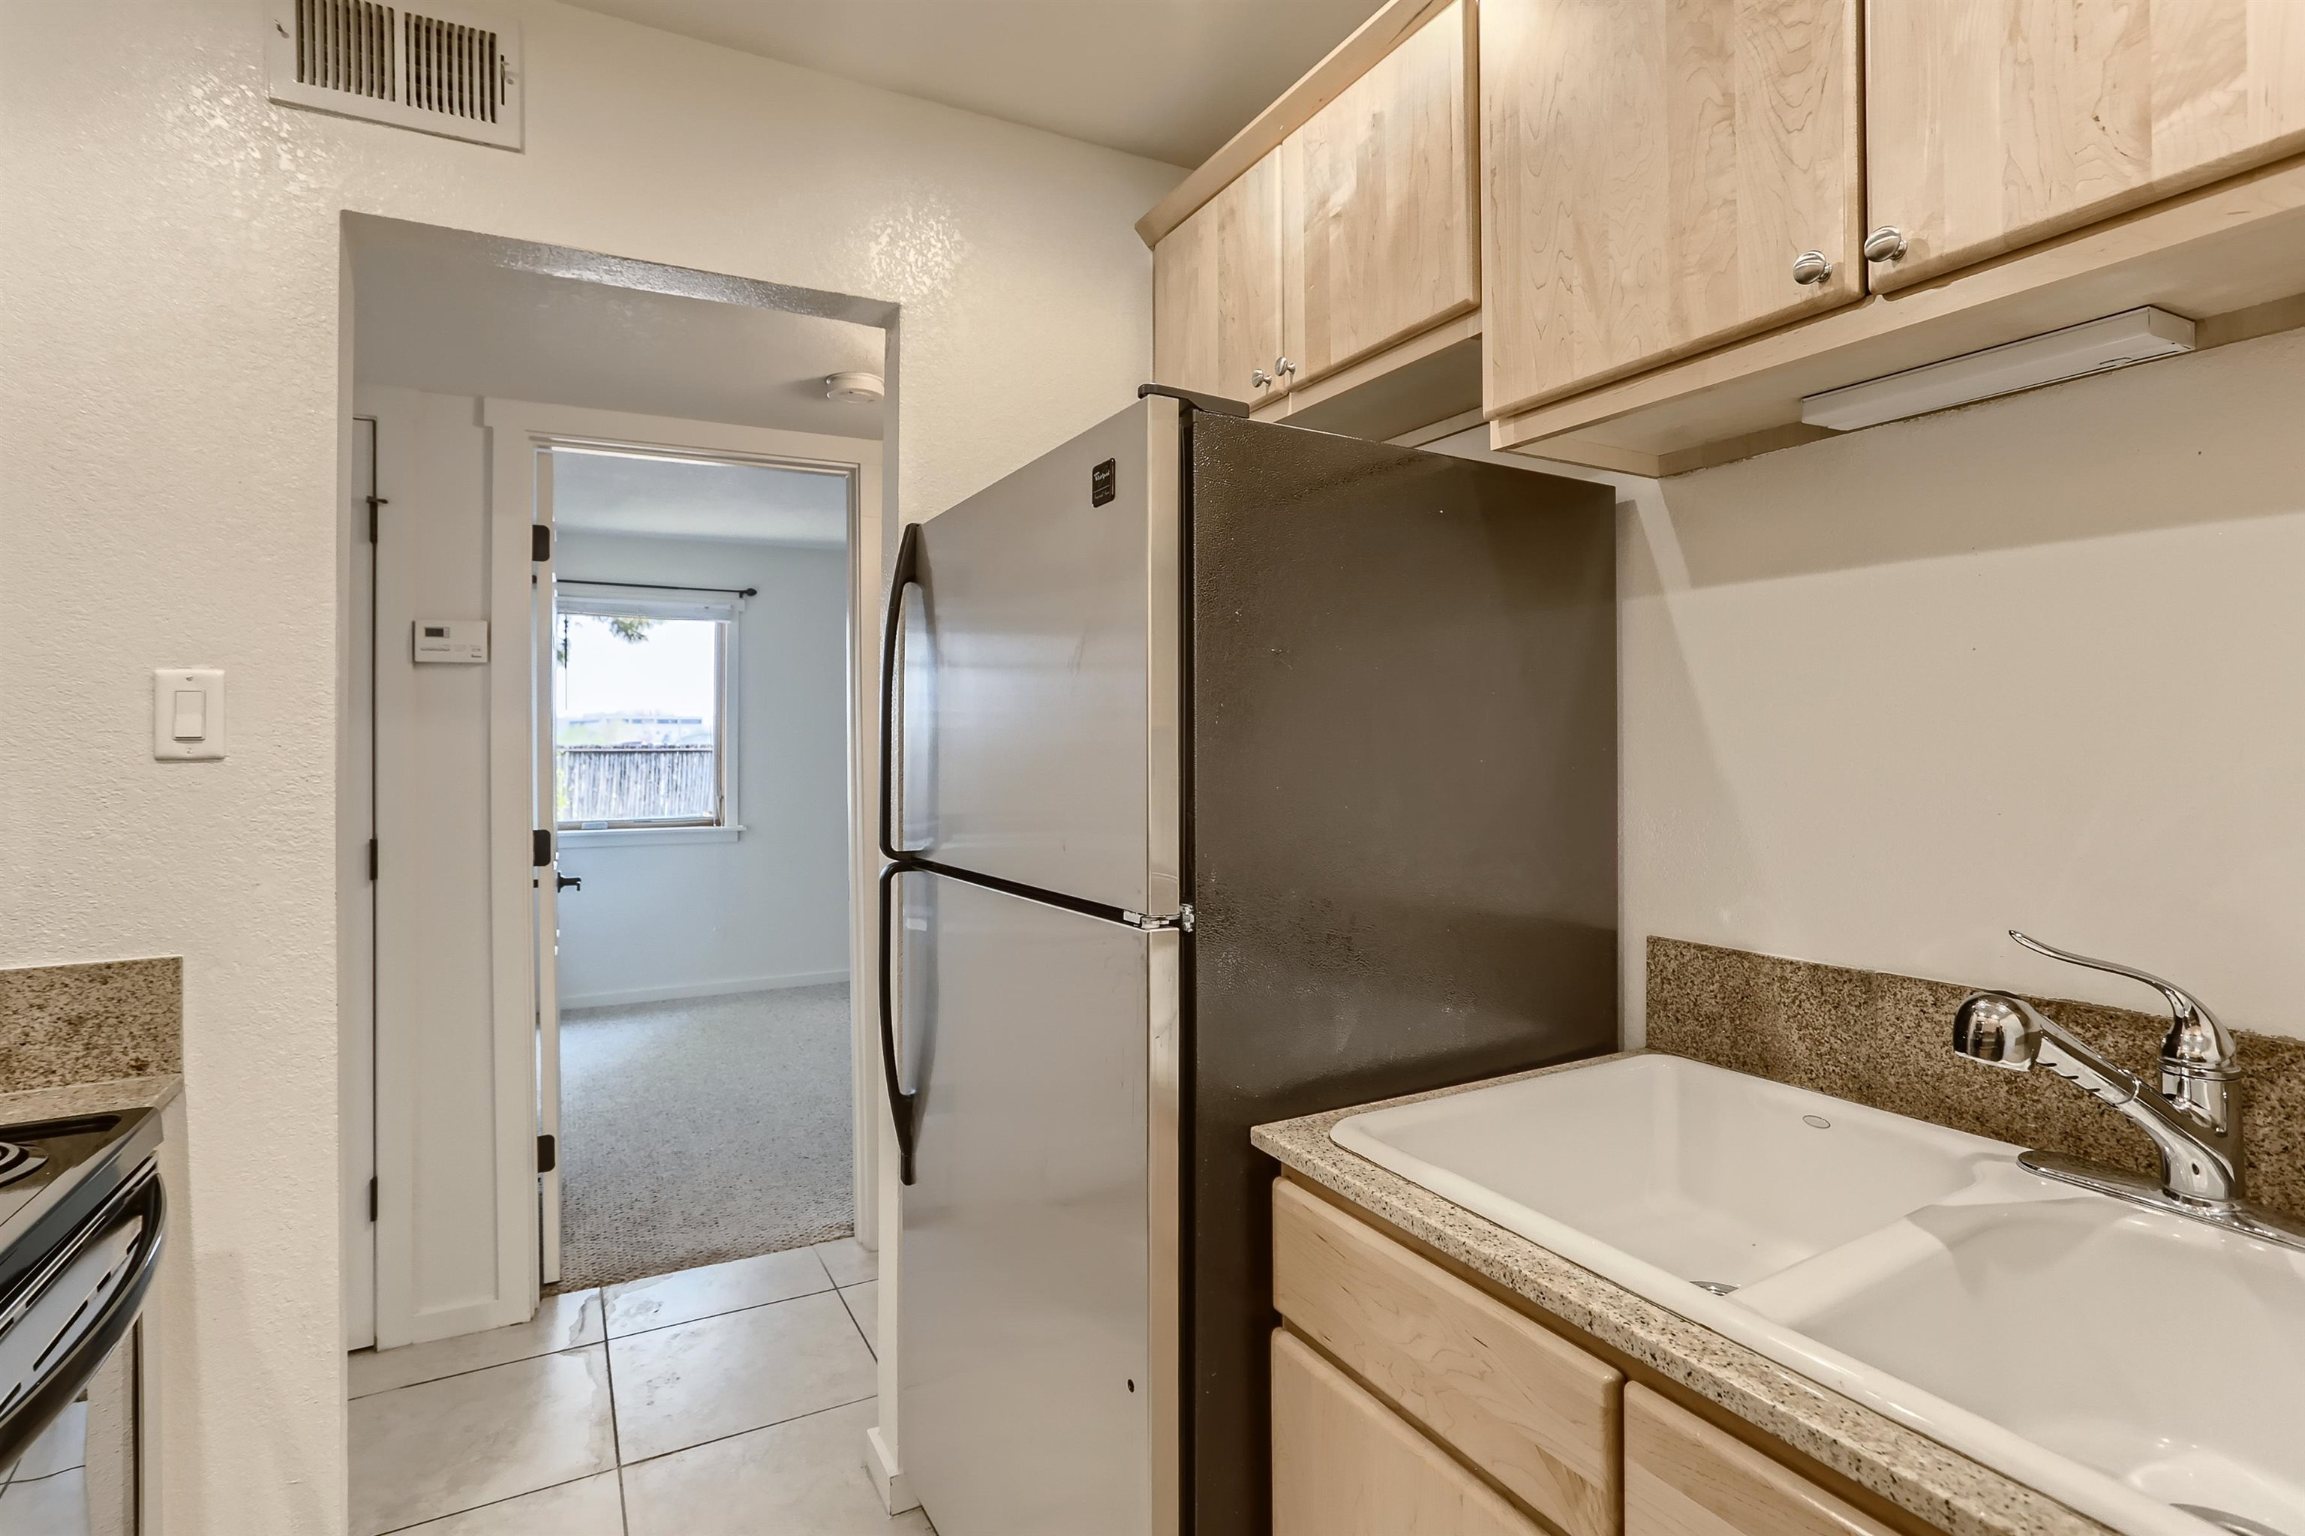 601 SAN MATEO #139 Building 13, Santa Fe, New Mexico 87505, 1 Bedroom Bedrooms, ,1 BathroomBathrooms,Residential,For Sale,601 SAN MATEO #139 Building 13,202201596